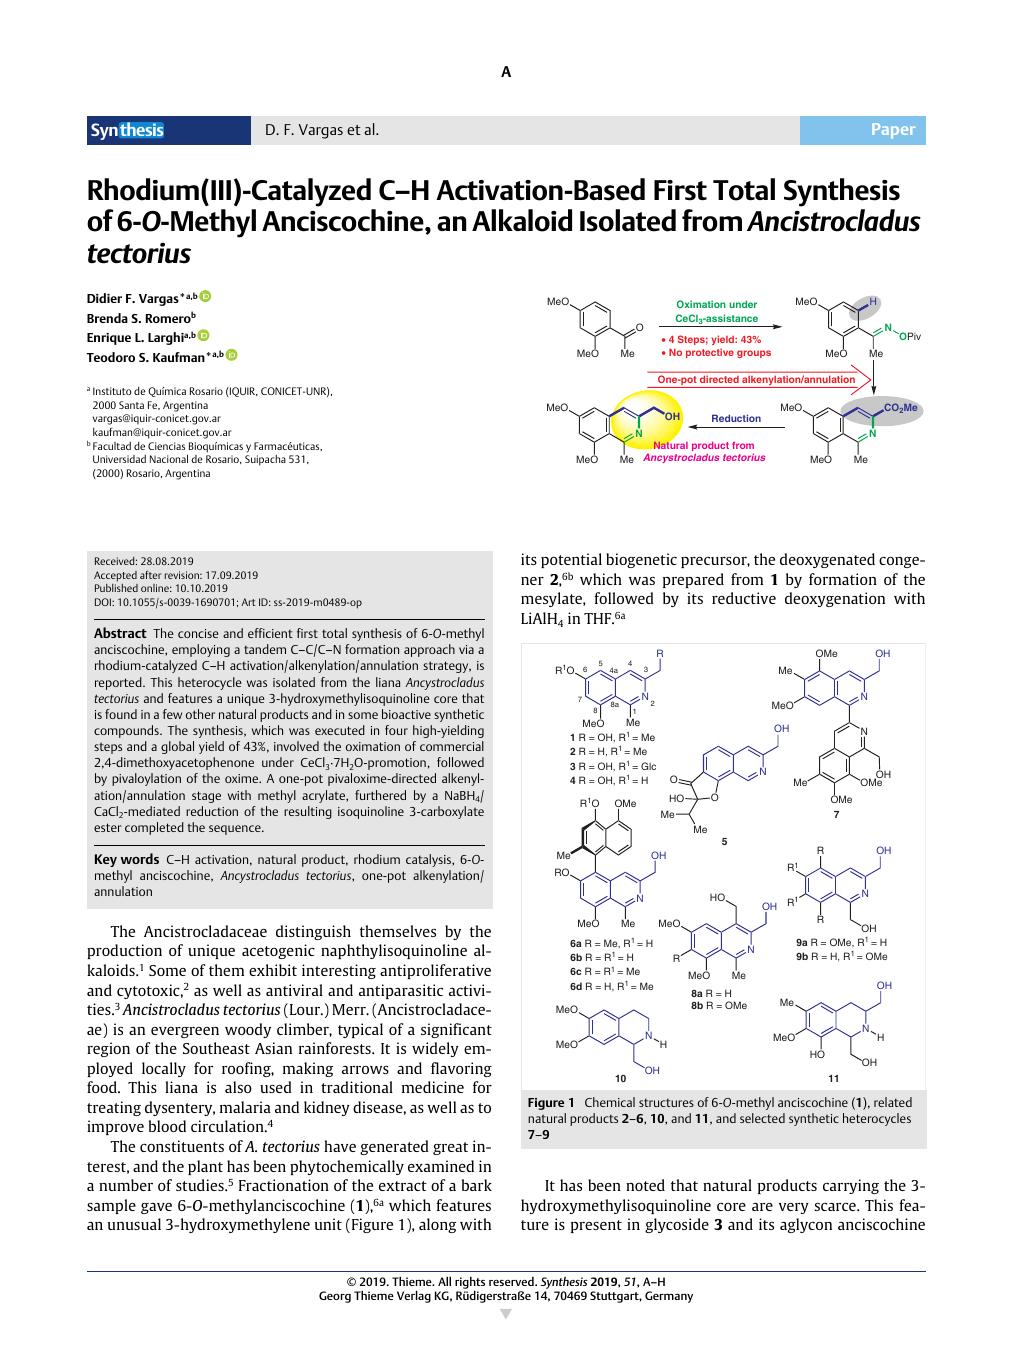 Rhodium Iii Catalyzed C H Activation Based First Total Synthesis Of 6 O Methyl Anciscochine An Alkaloid Isolated From Ancistrocladus Tectorius Synthesis X Mol